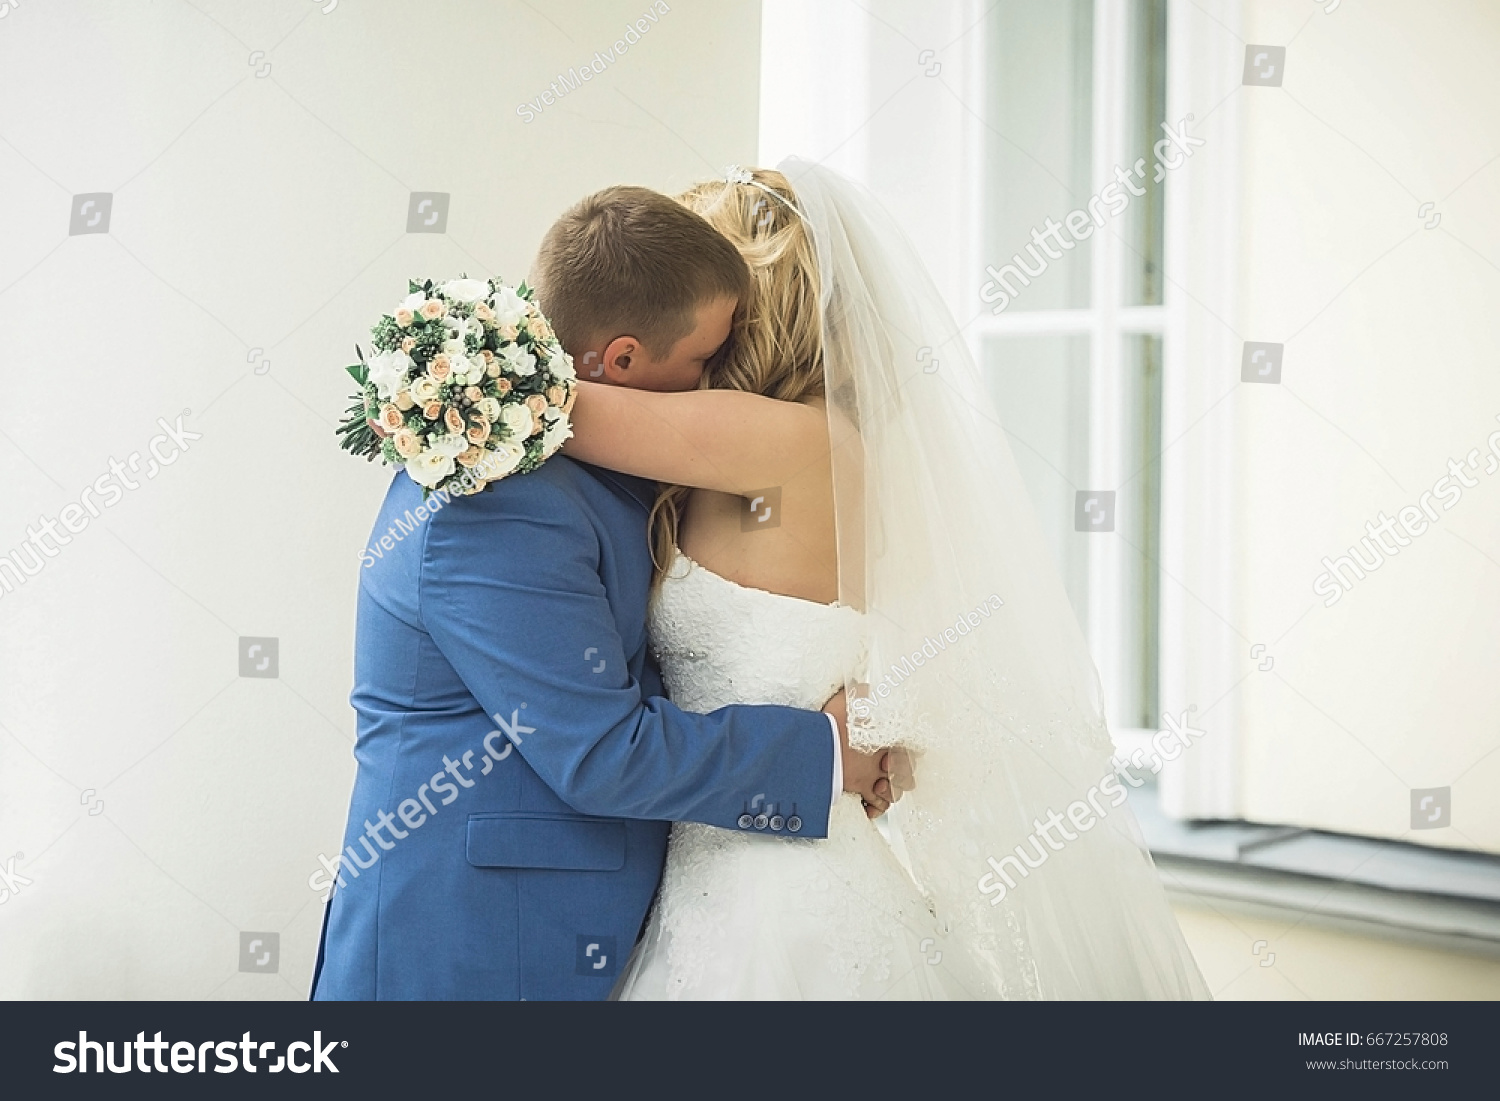 The groom embraces the bride? The groom hugs bride from behind. Woman and man in wedding dress outdoors holding hands. A young man gently embraces his bride in a wedding dress. Wife and husband. #667257808